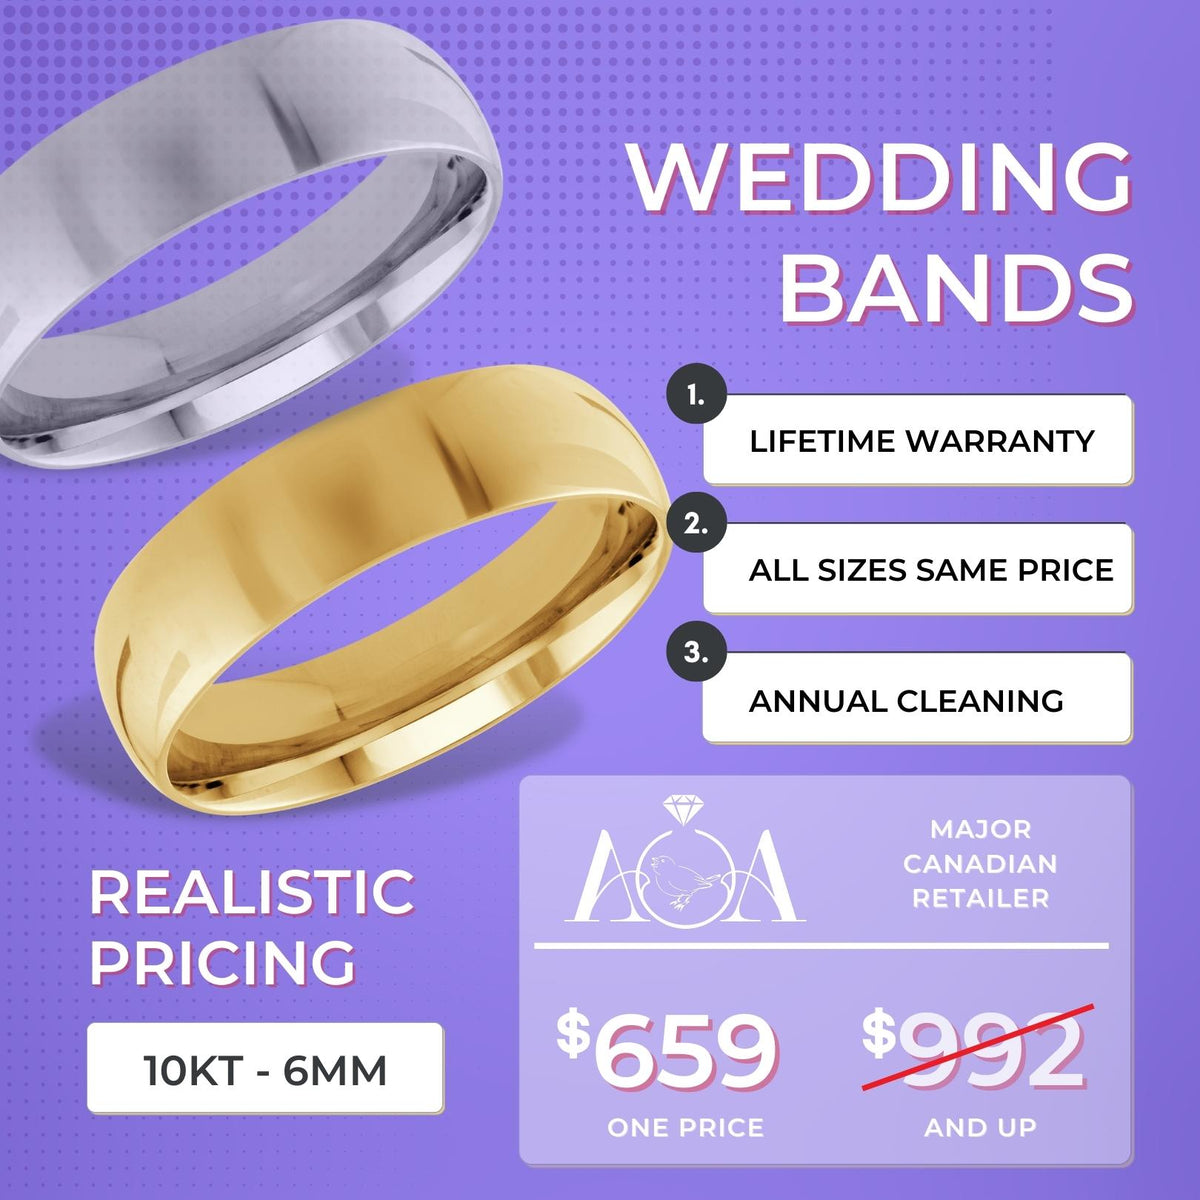 Wedding Bands Price Compared to Major Canadian Retailer